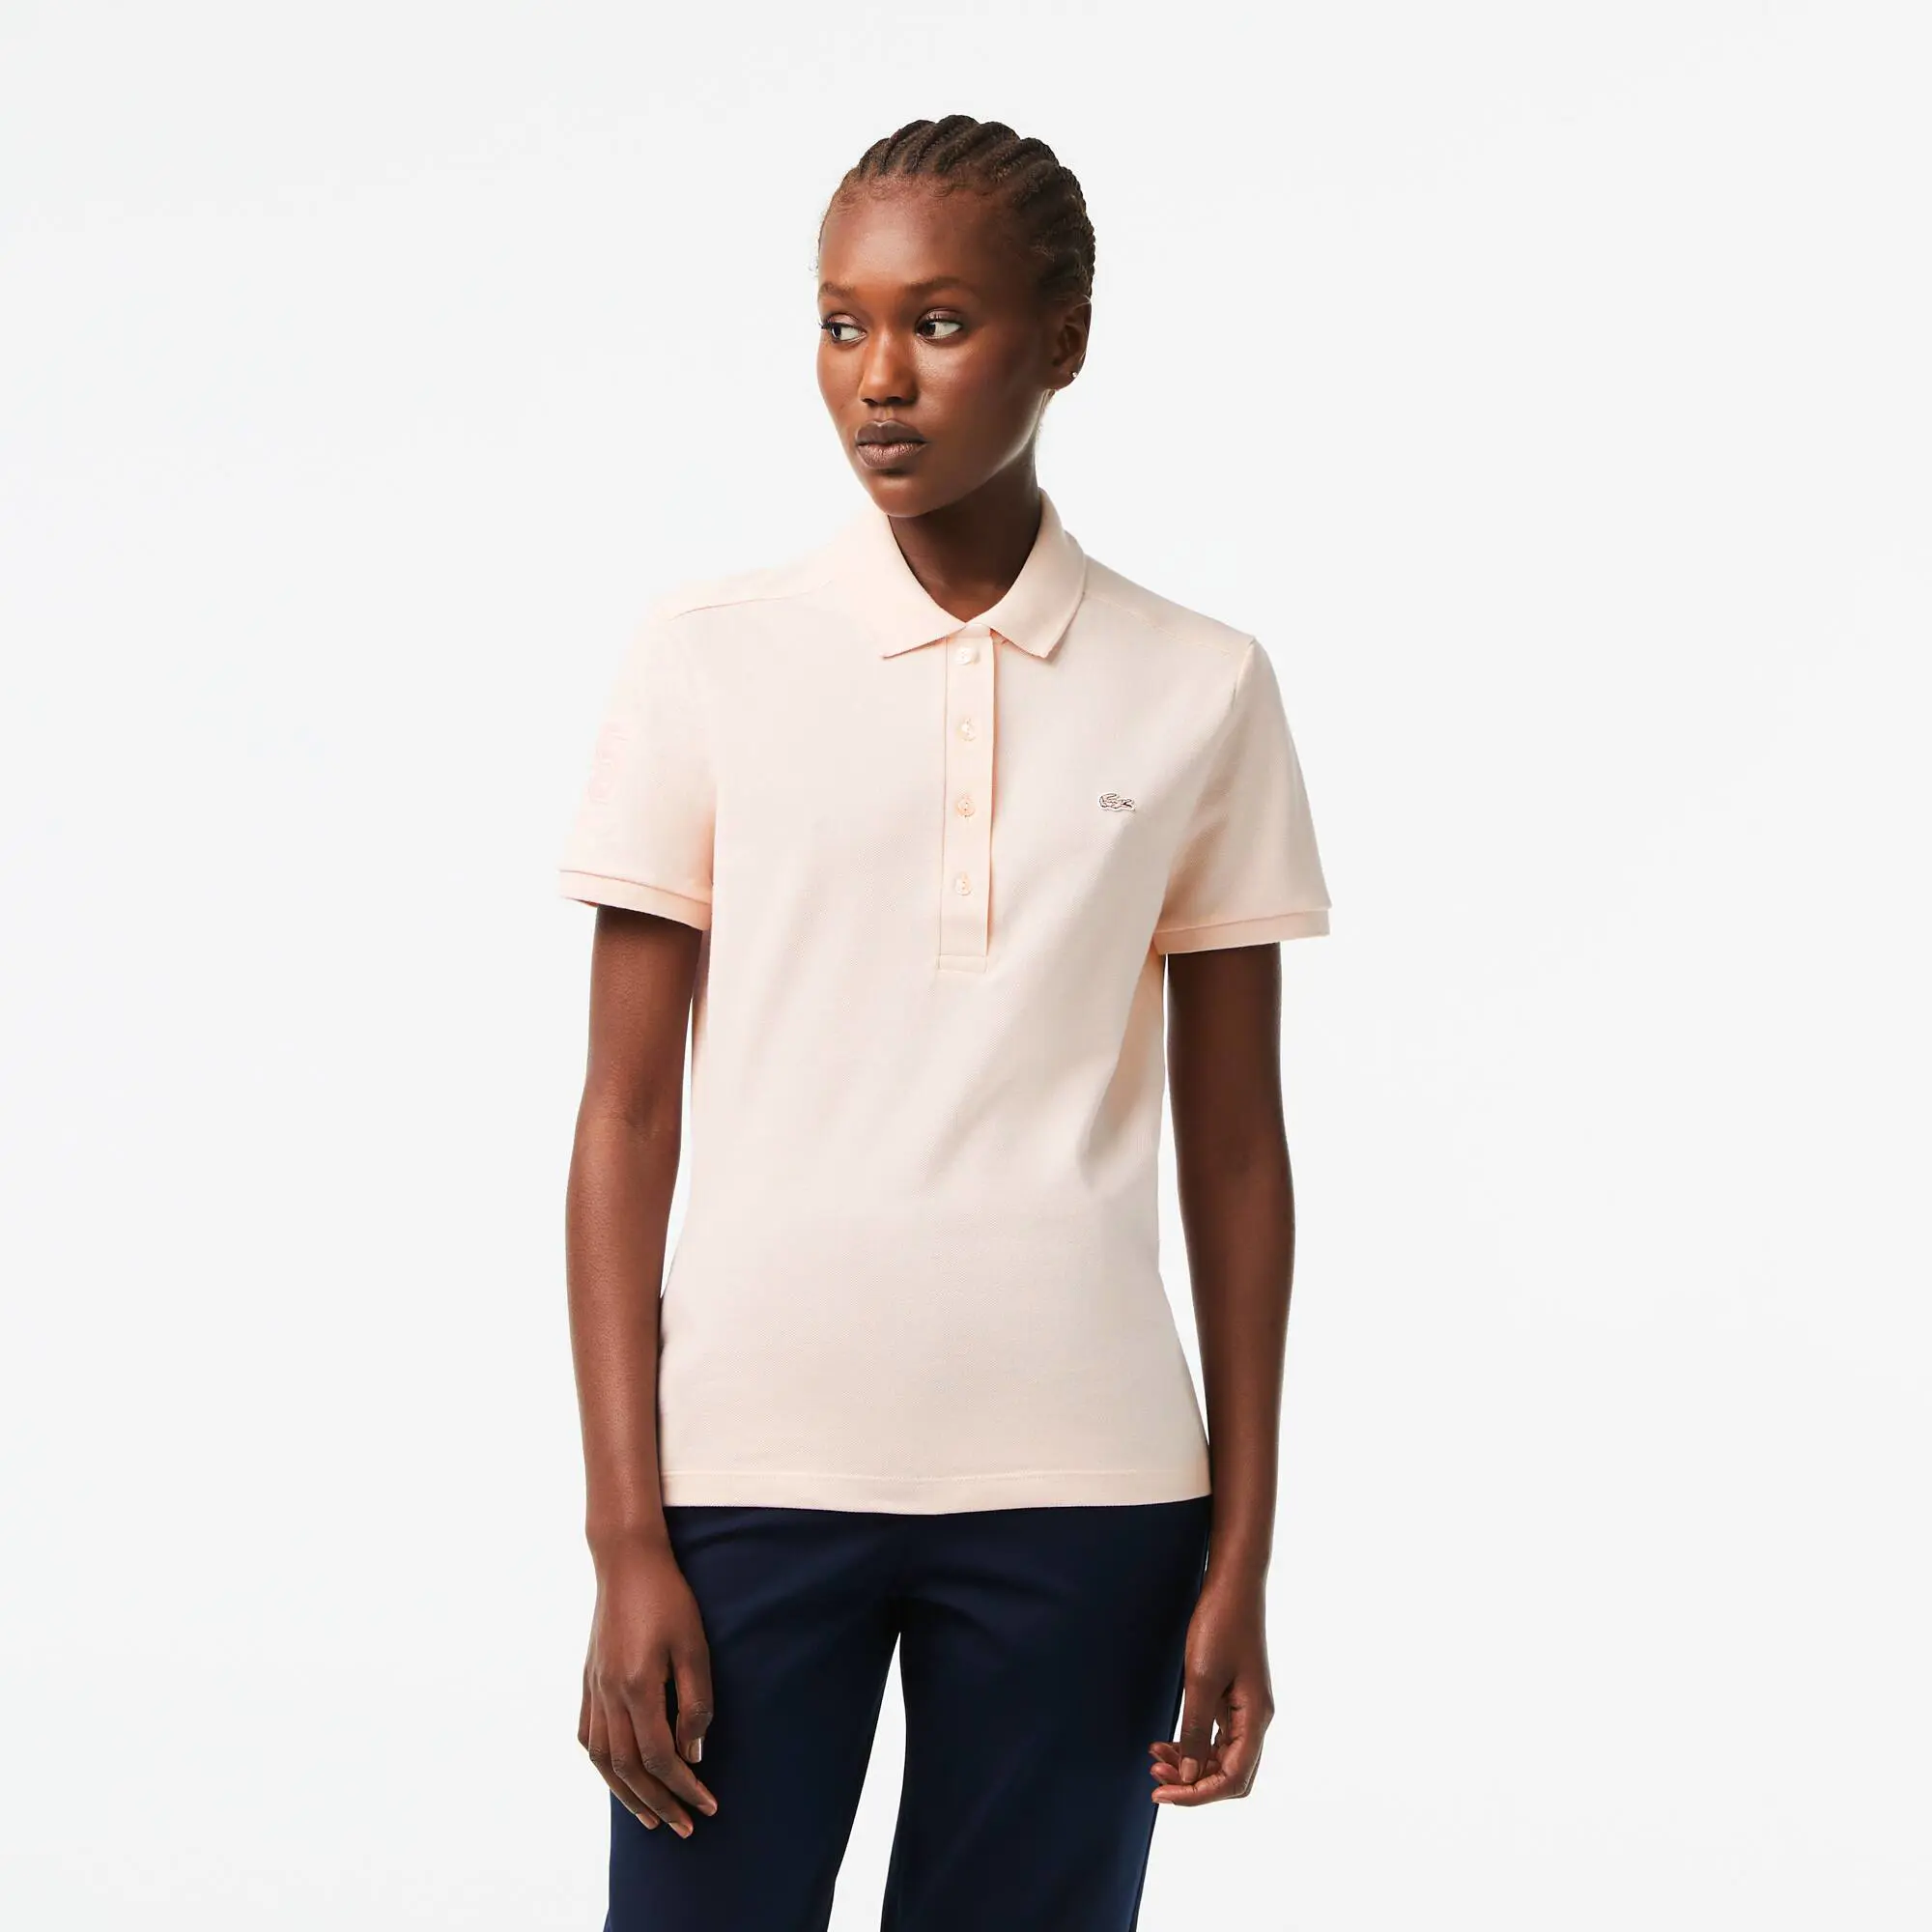 Lacoste Women’s Lacoste x Club Med Cotton Polo Shirt. 1